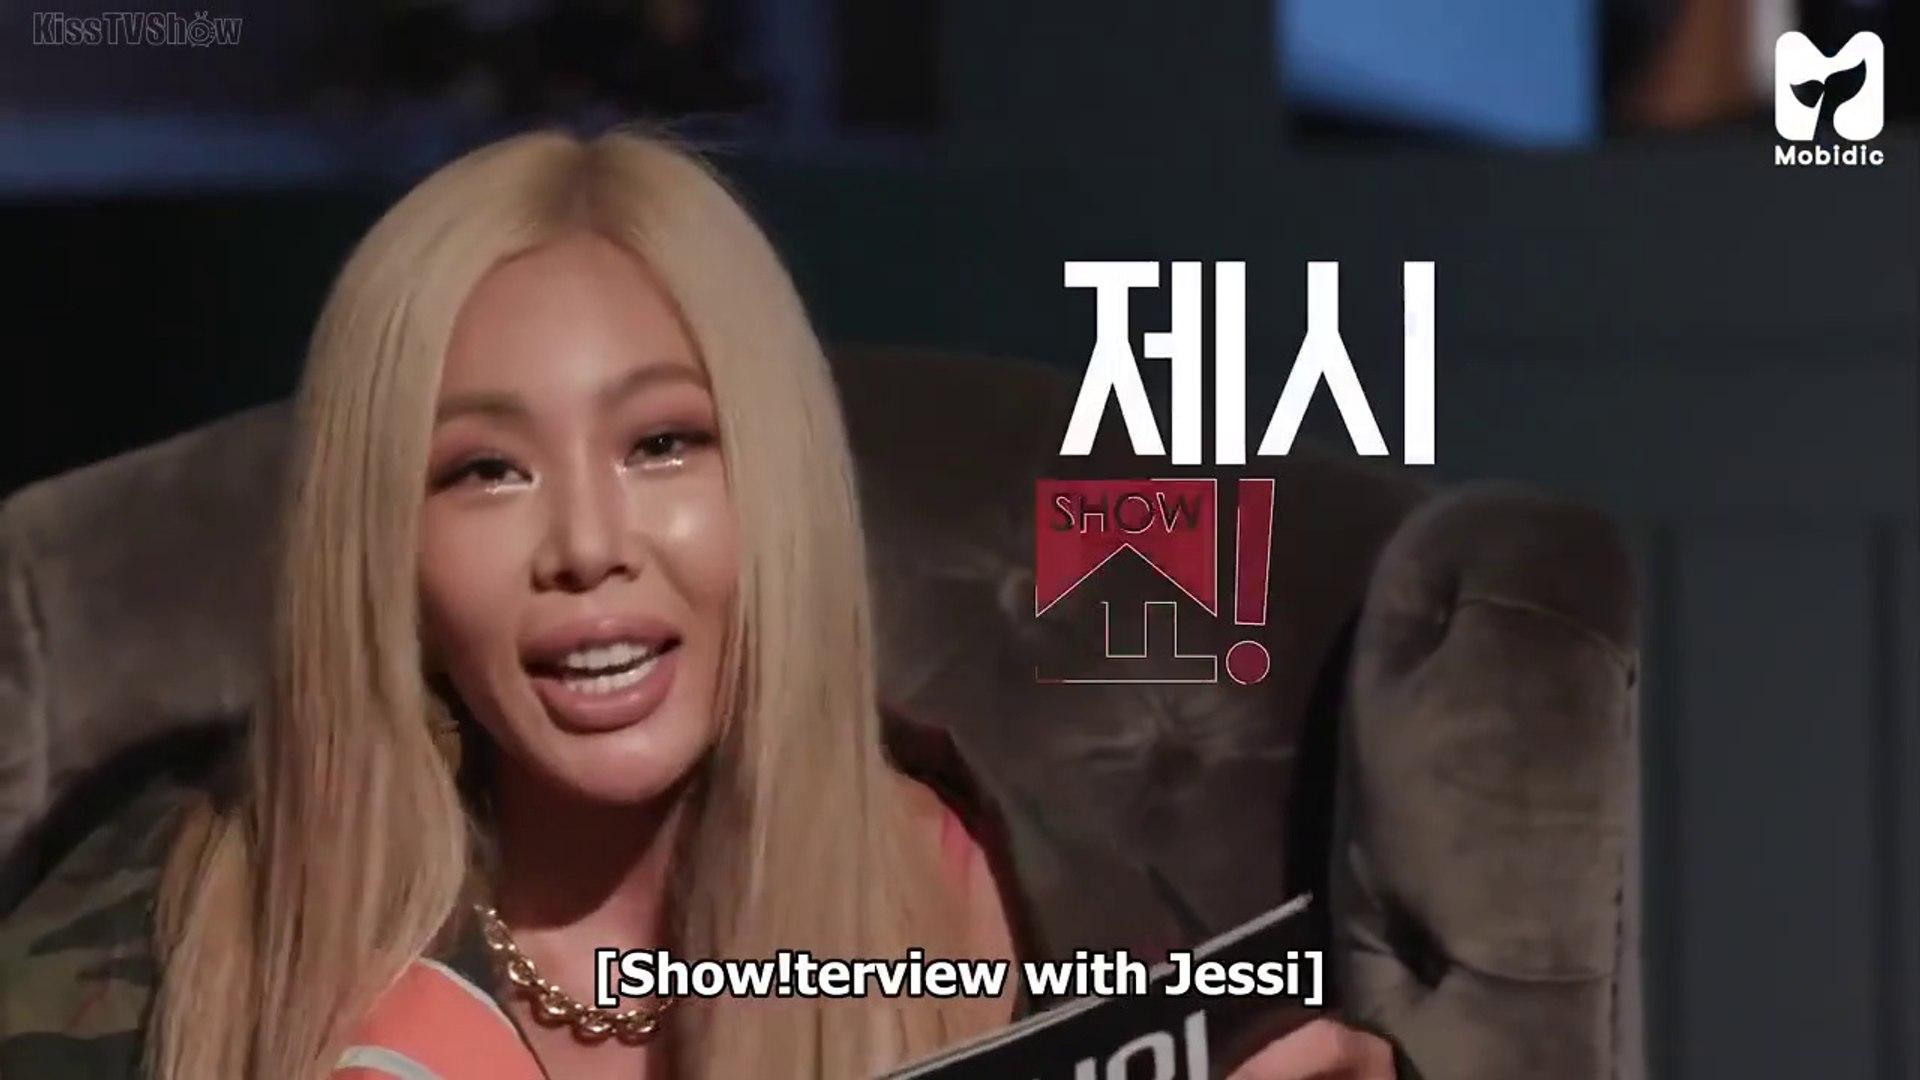 SHOWTERVIEW WITH JESSI!